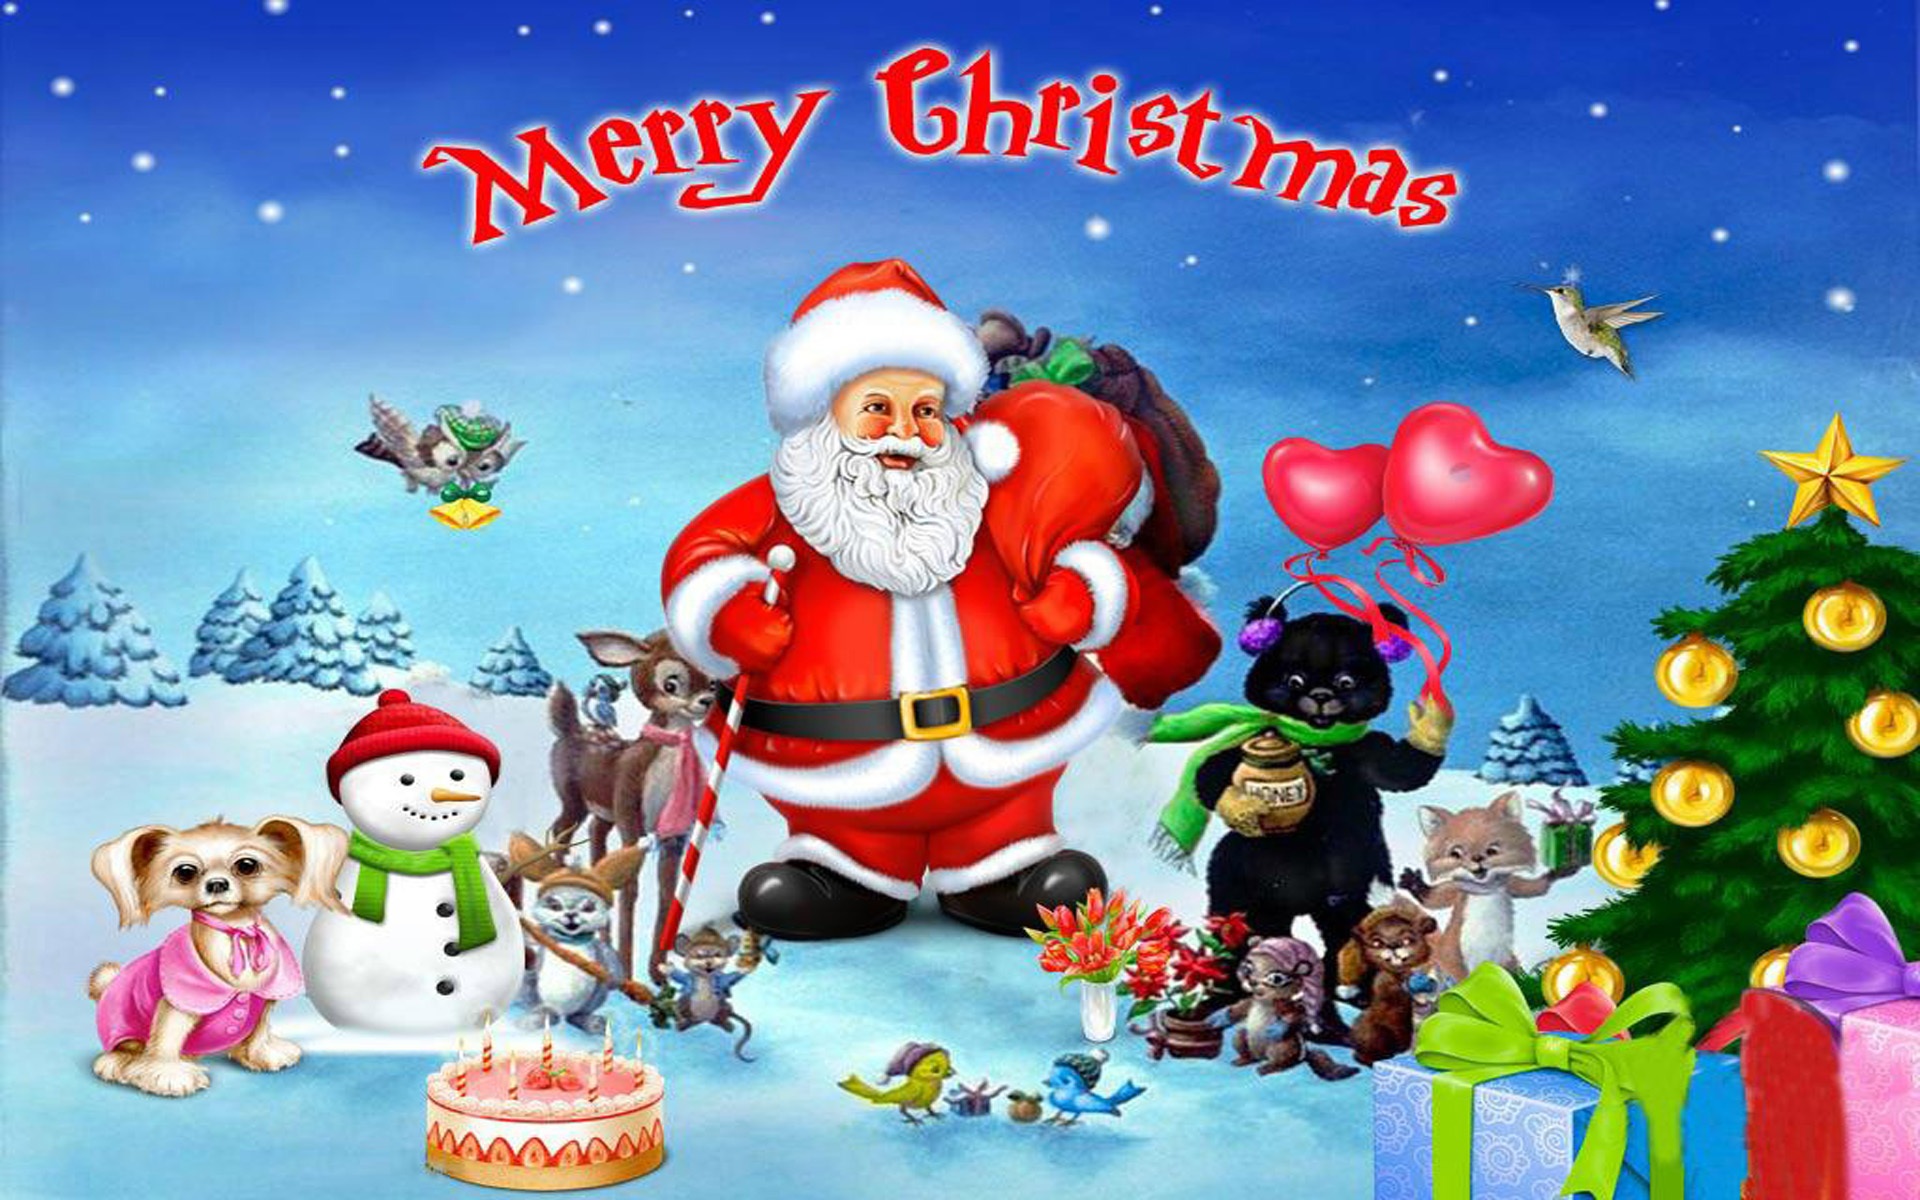 Merry Christmas With Santa Clause His Friends